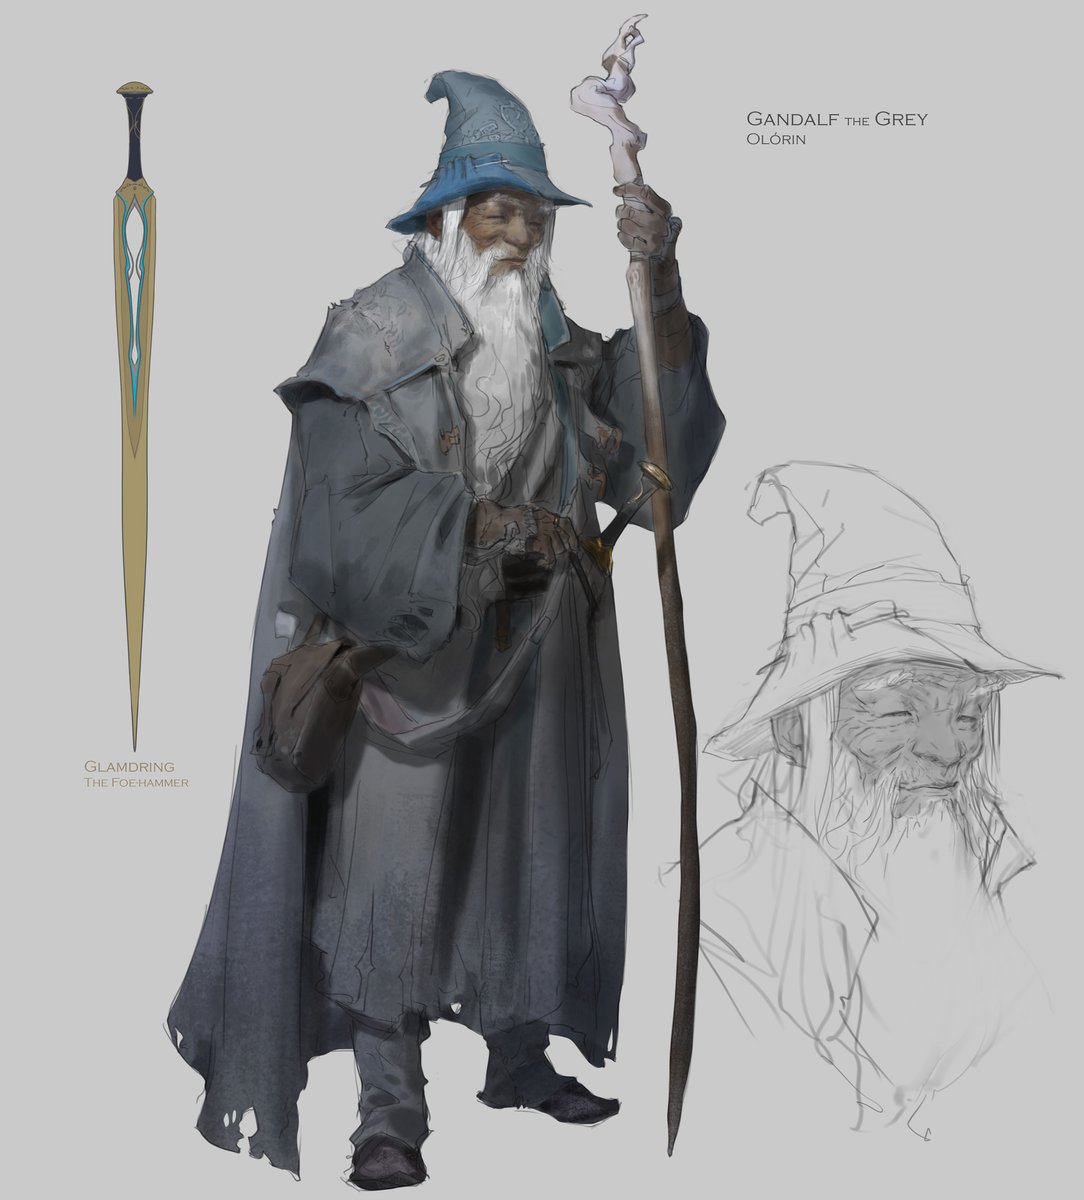 Way back in 2020 I worked with art director Ovidio Cartagena and Wizards of the Coast to create a new interpretation of The Lord of the Rings for a new Magic the gathering set. Here is my take on Gandalf the Grey #gandalf #mtglotr #magicthegathering